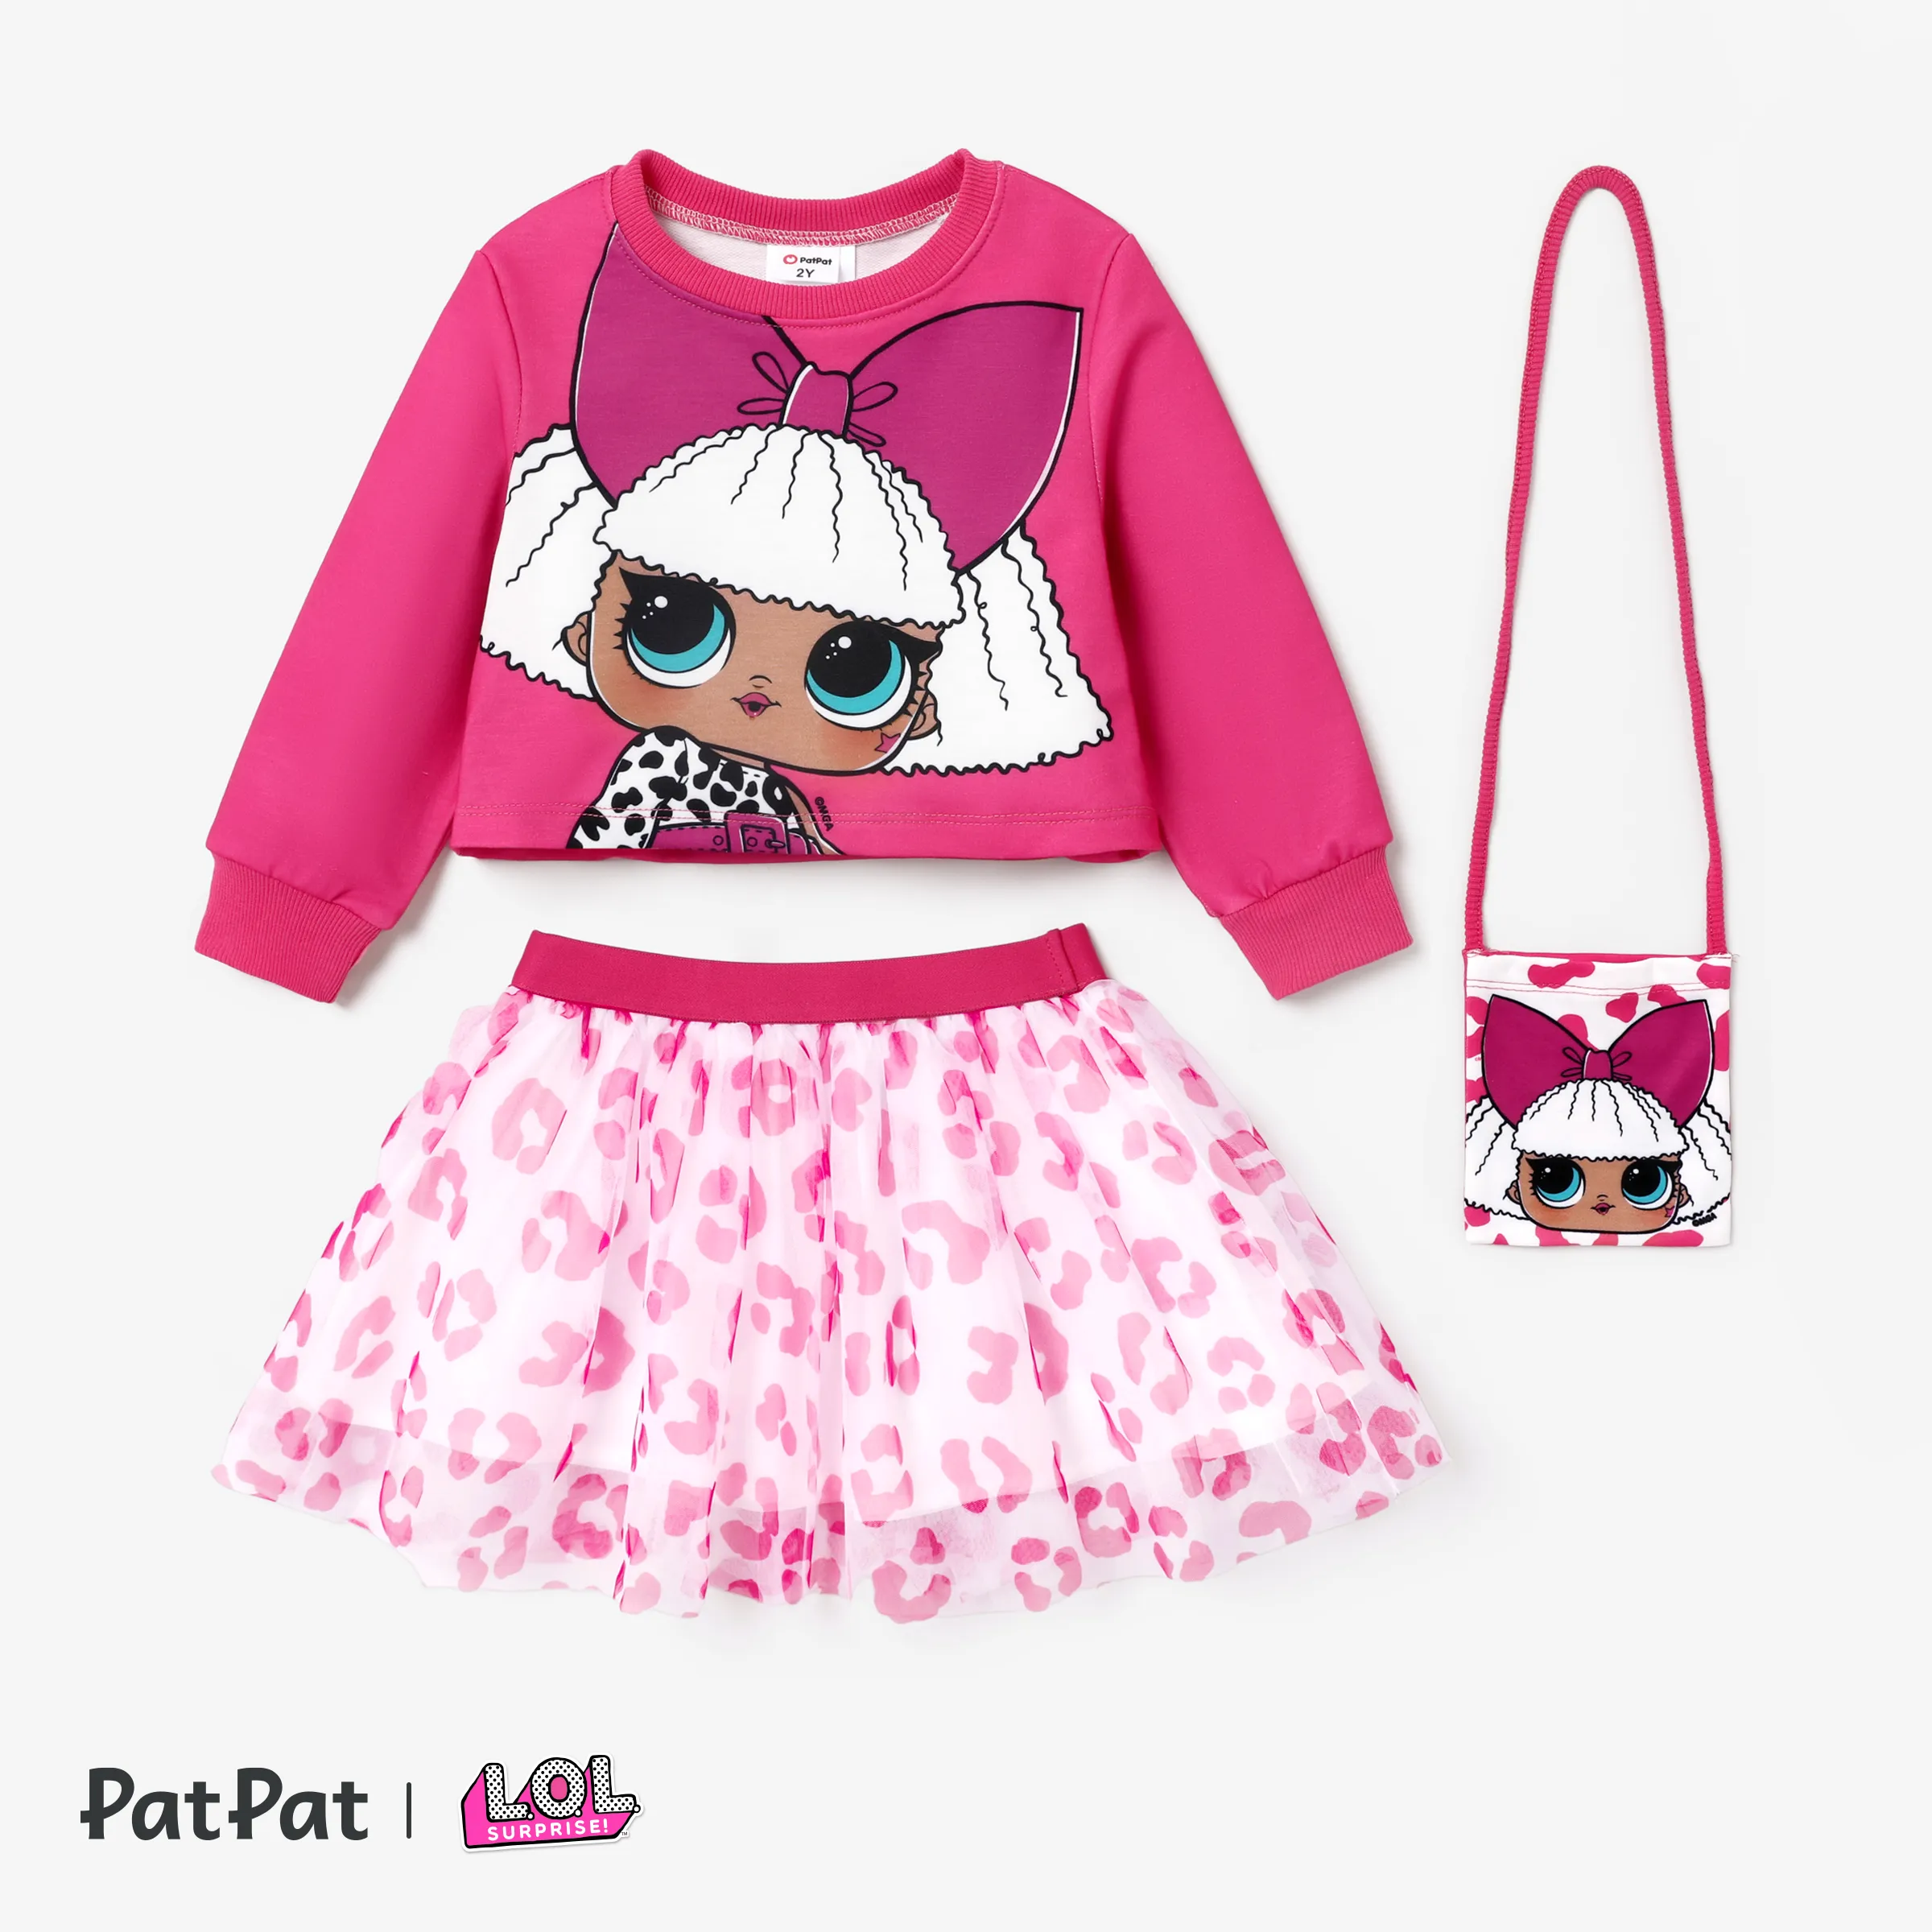 L.O.L. SURPRISE! Toddler Girl Glitter Hem Character Pattern Top with Crossbody Bag Skirt Suit